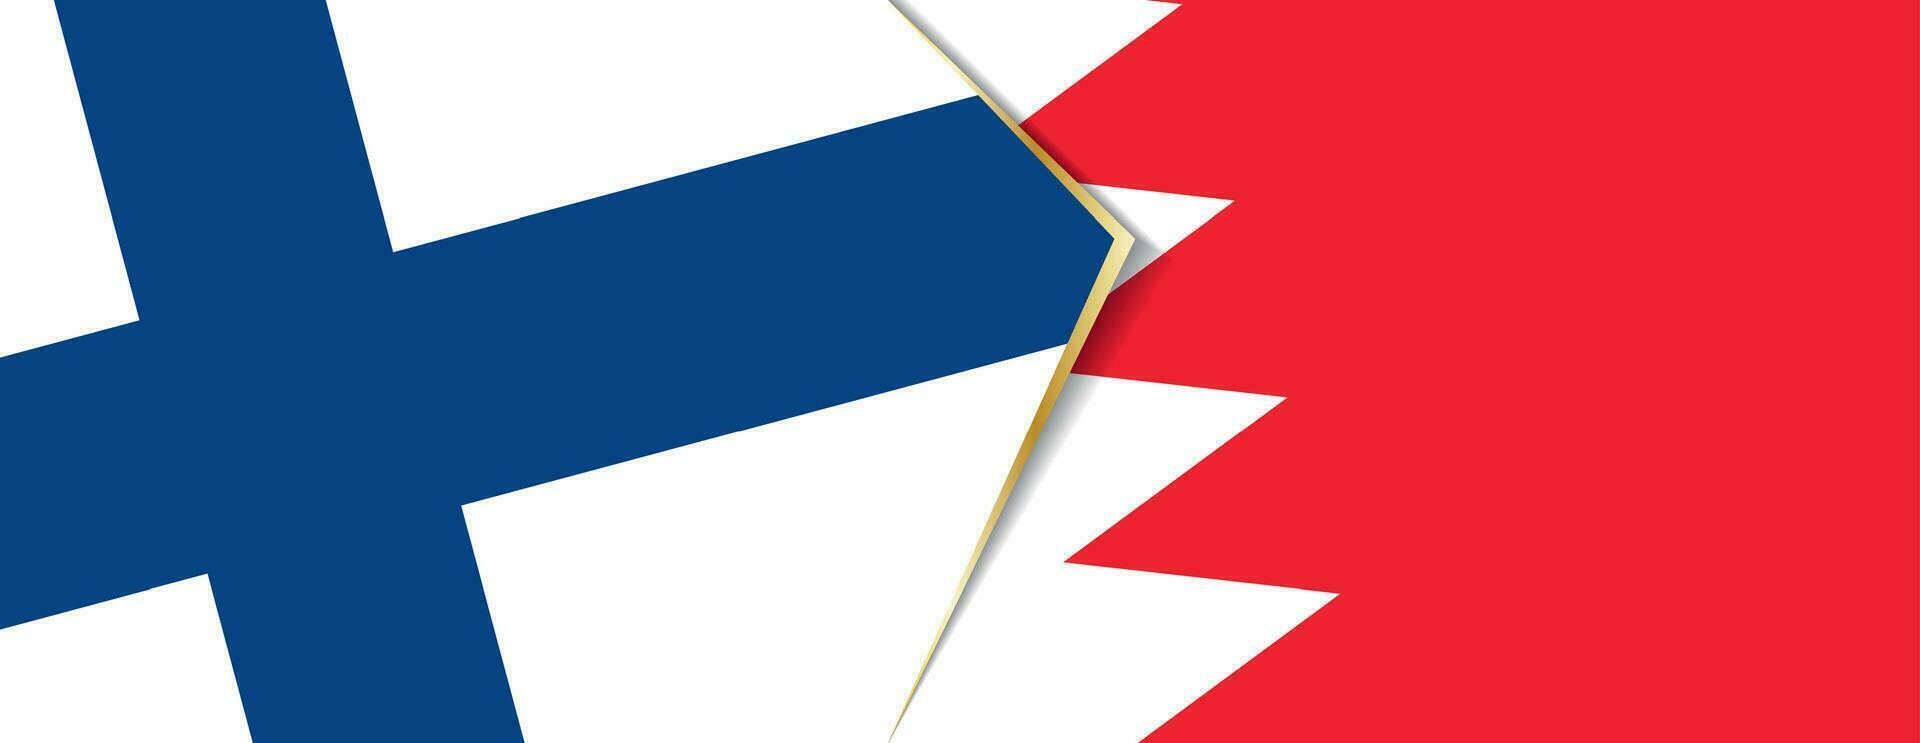 Finland and Bahrain flags, two vector flags.